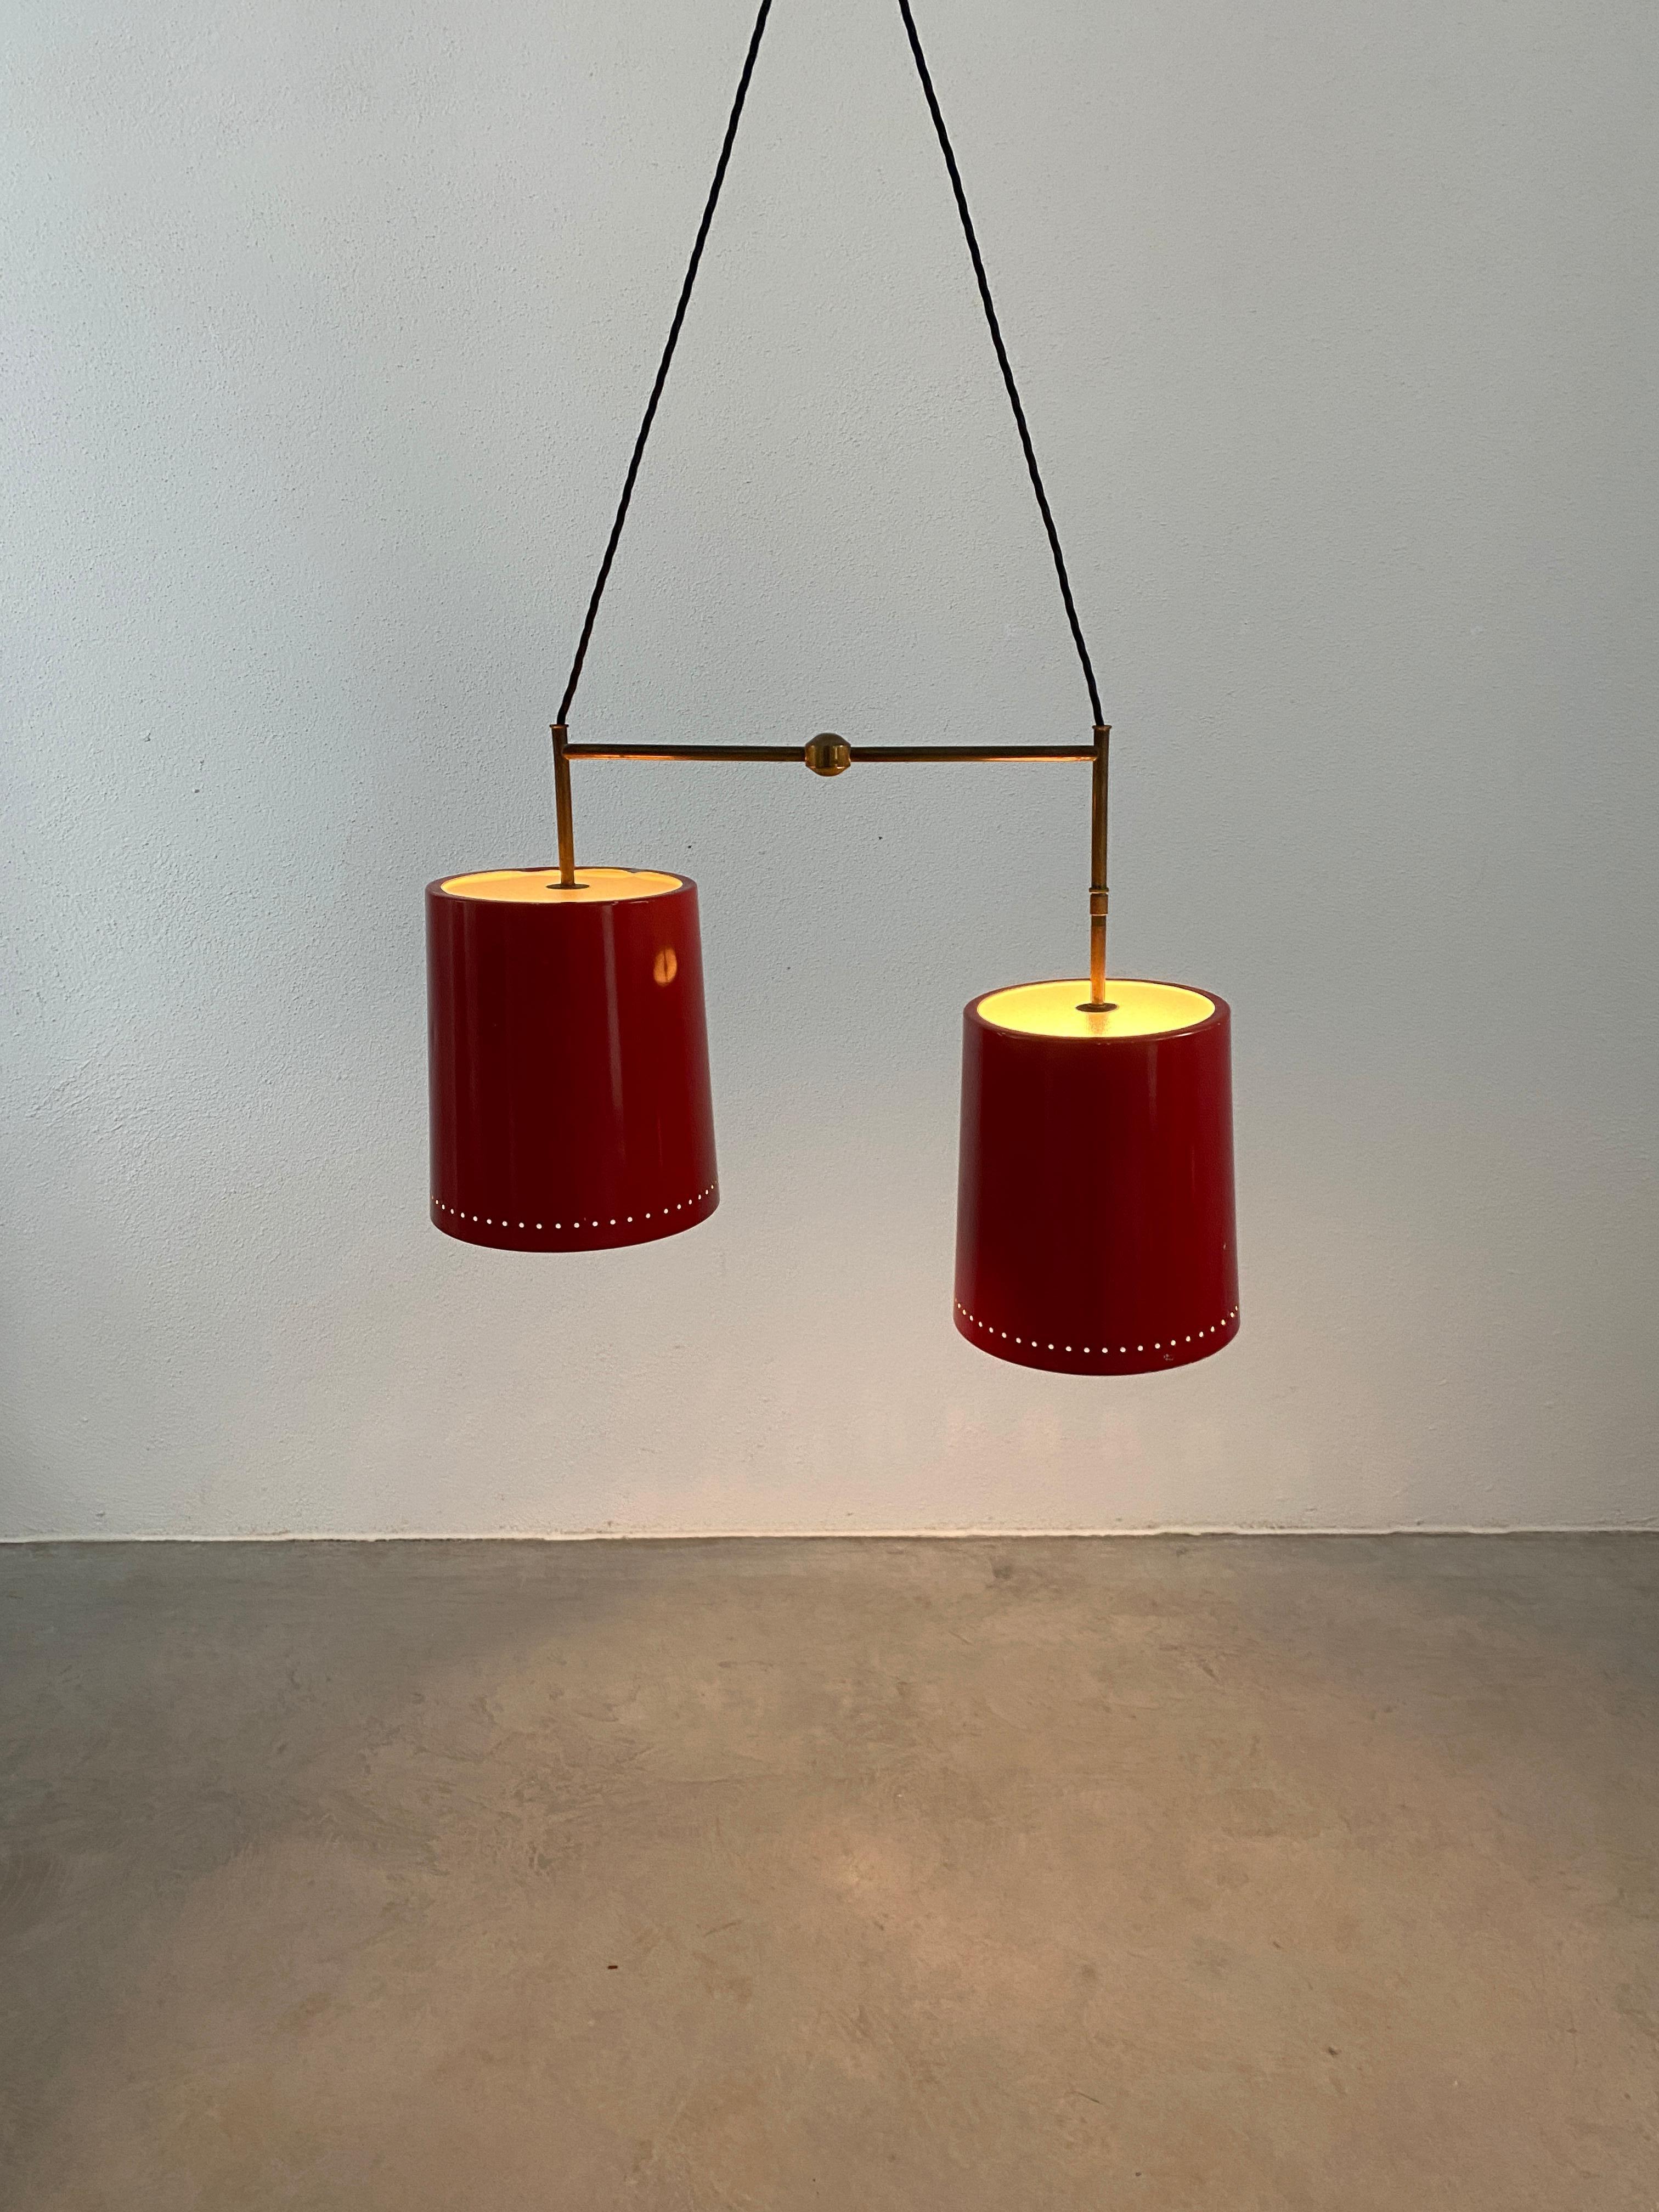 Rare double suspension chandelier Stilnovo, Italy, 1950

Two-cord suspension light with original canopy. Two red lacquered aluminum slightly conical tubes with glass disks. The fixture is in original condition with no damages to the glass, fully